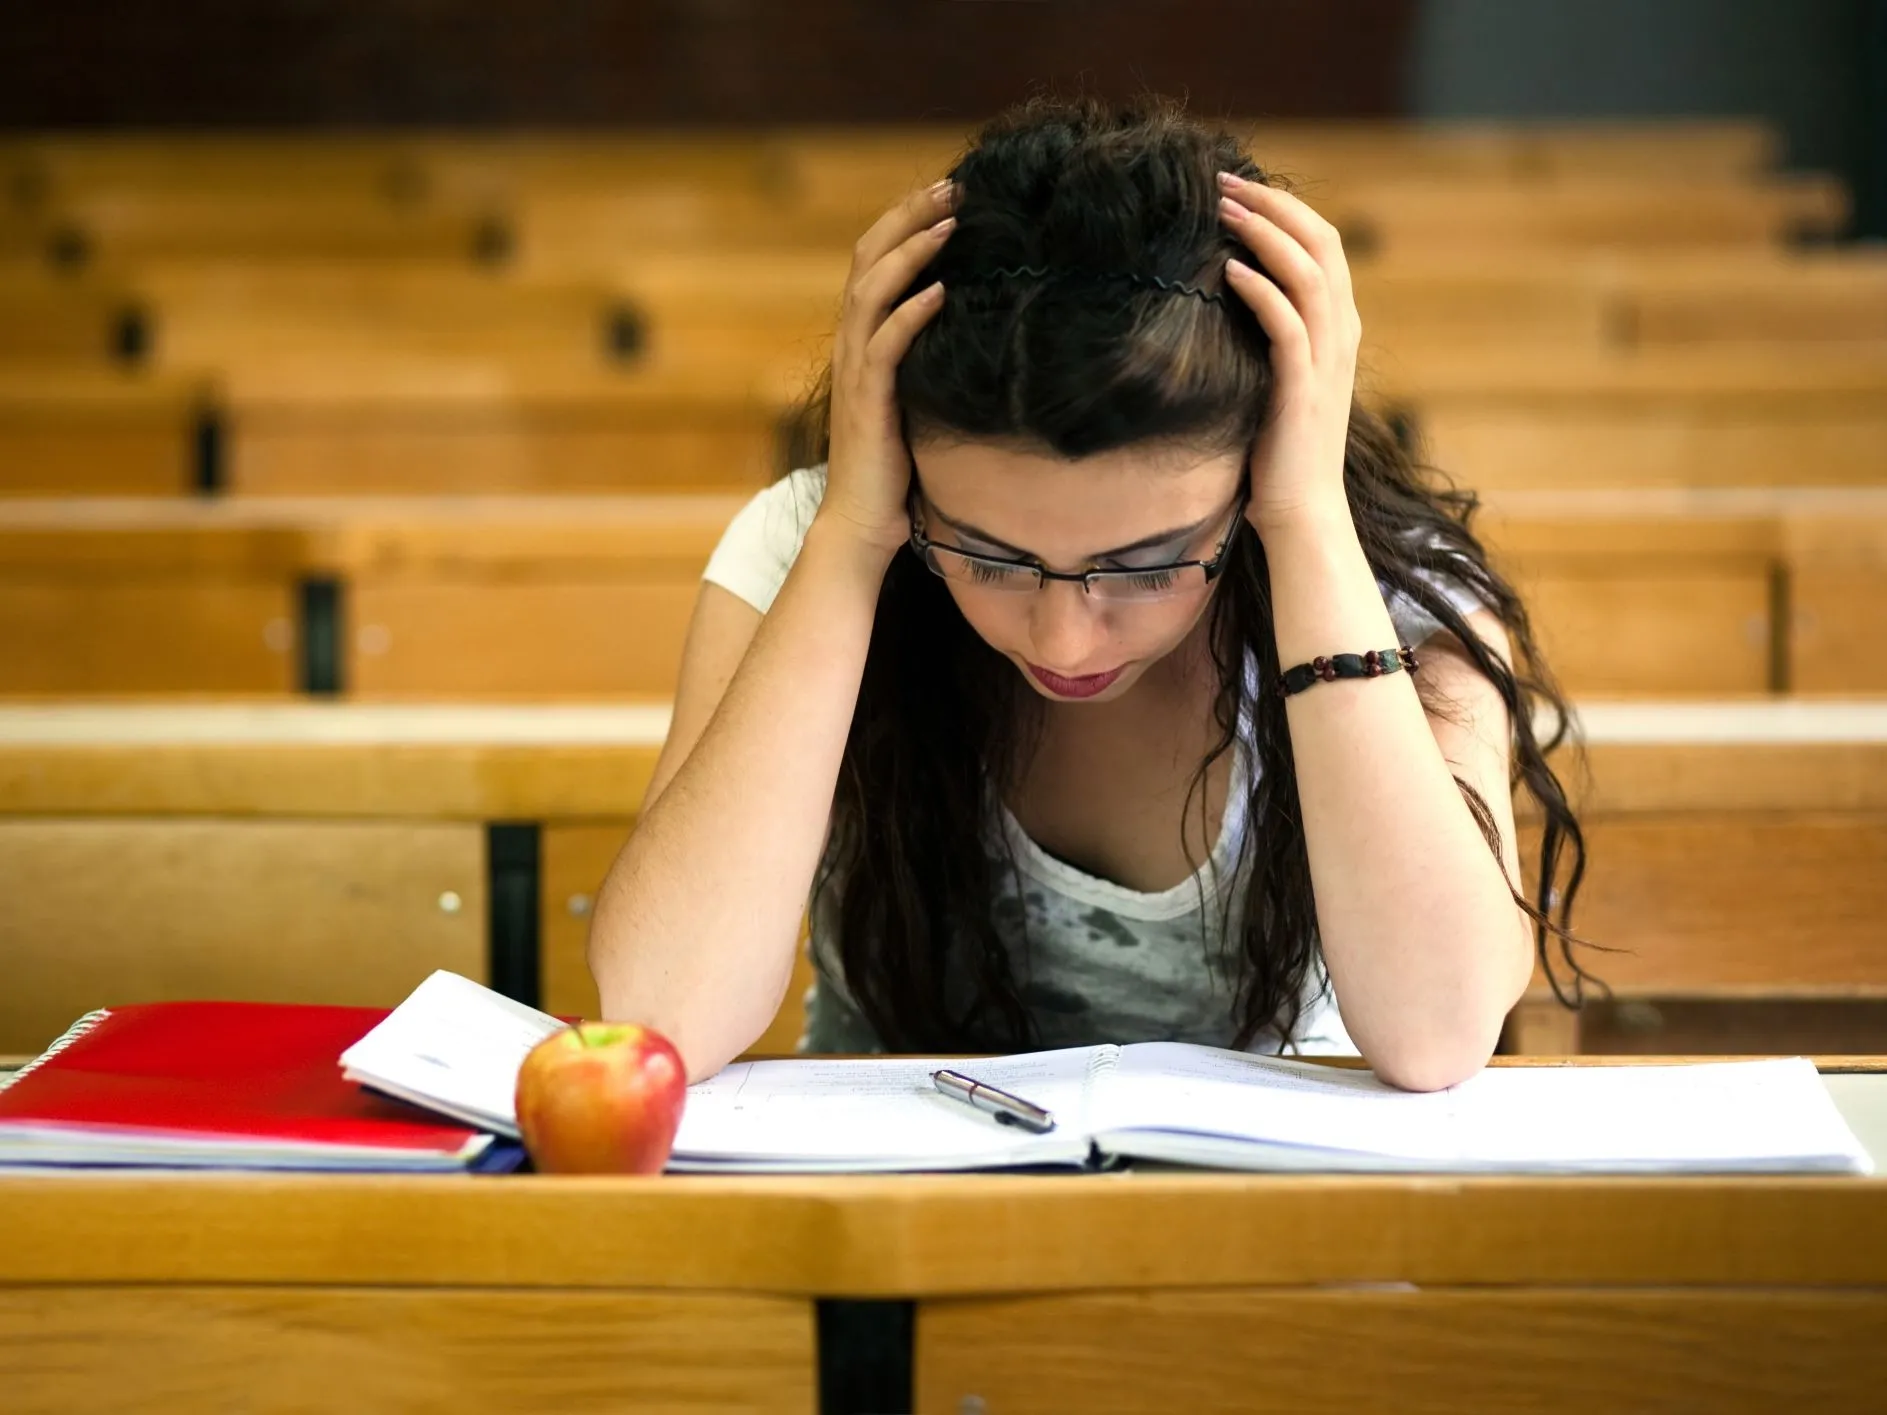 The most common concerns in young people;Exam anxiety